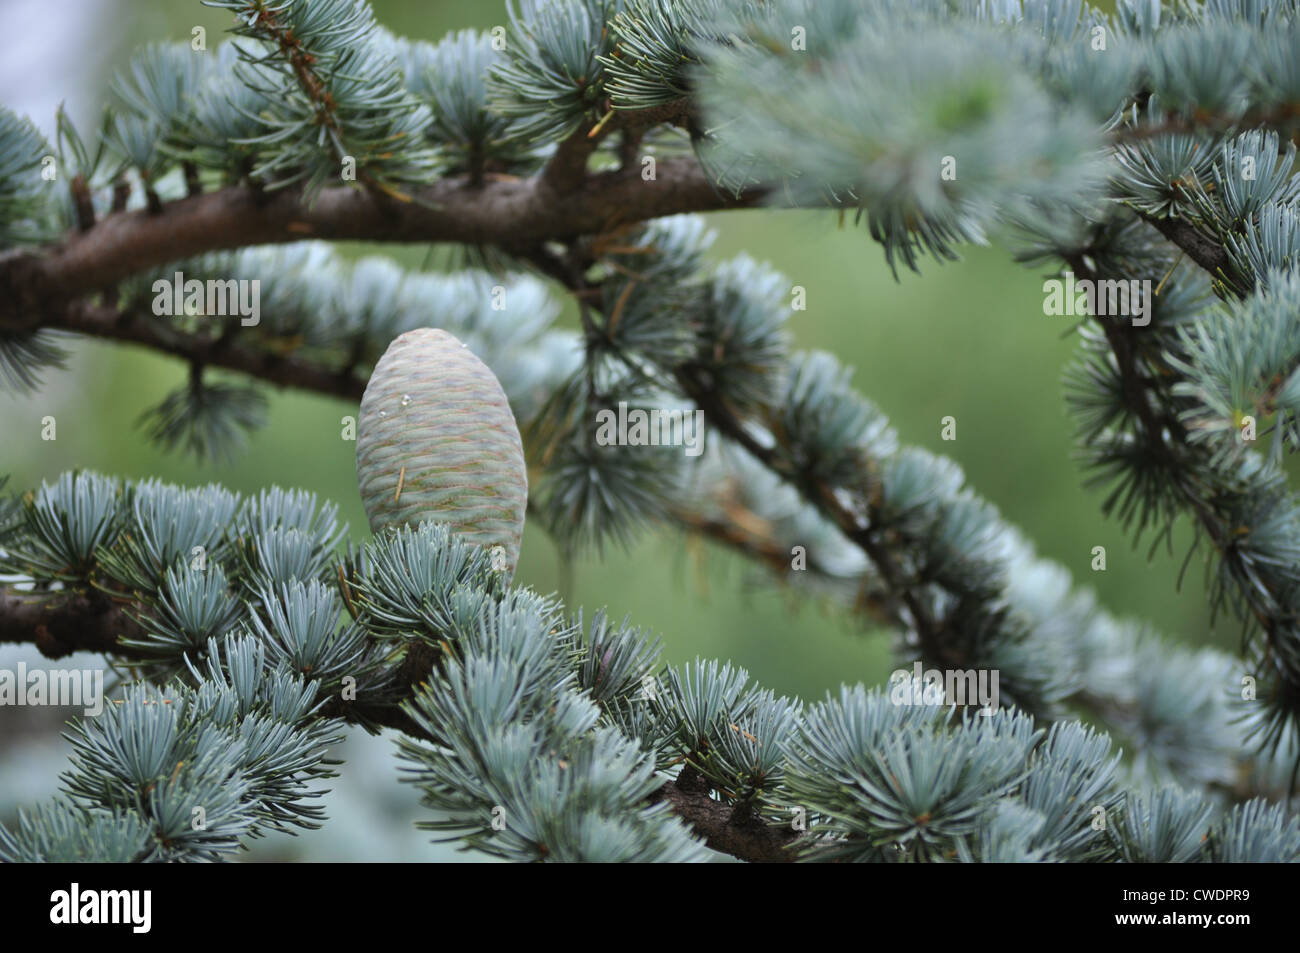 The pale upright cone of the Blue Atlas Cedar varies in shade subtly from the blue haze of the needles. Stock Photo